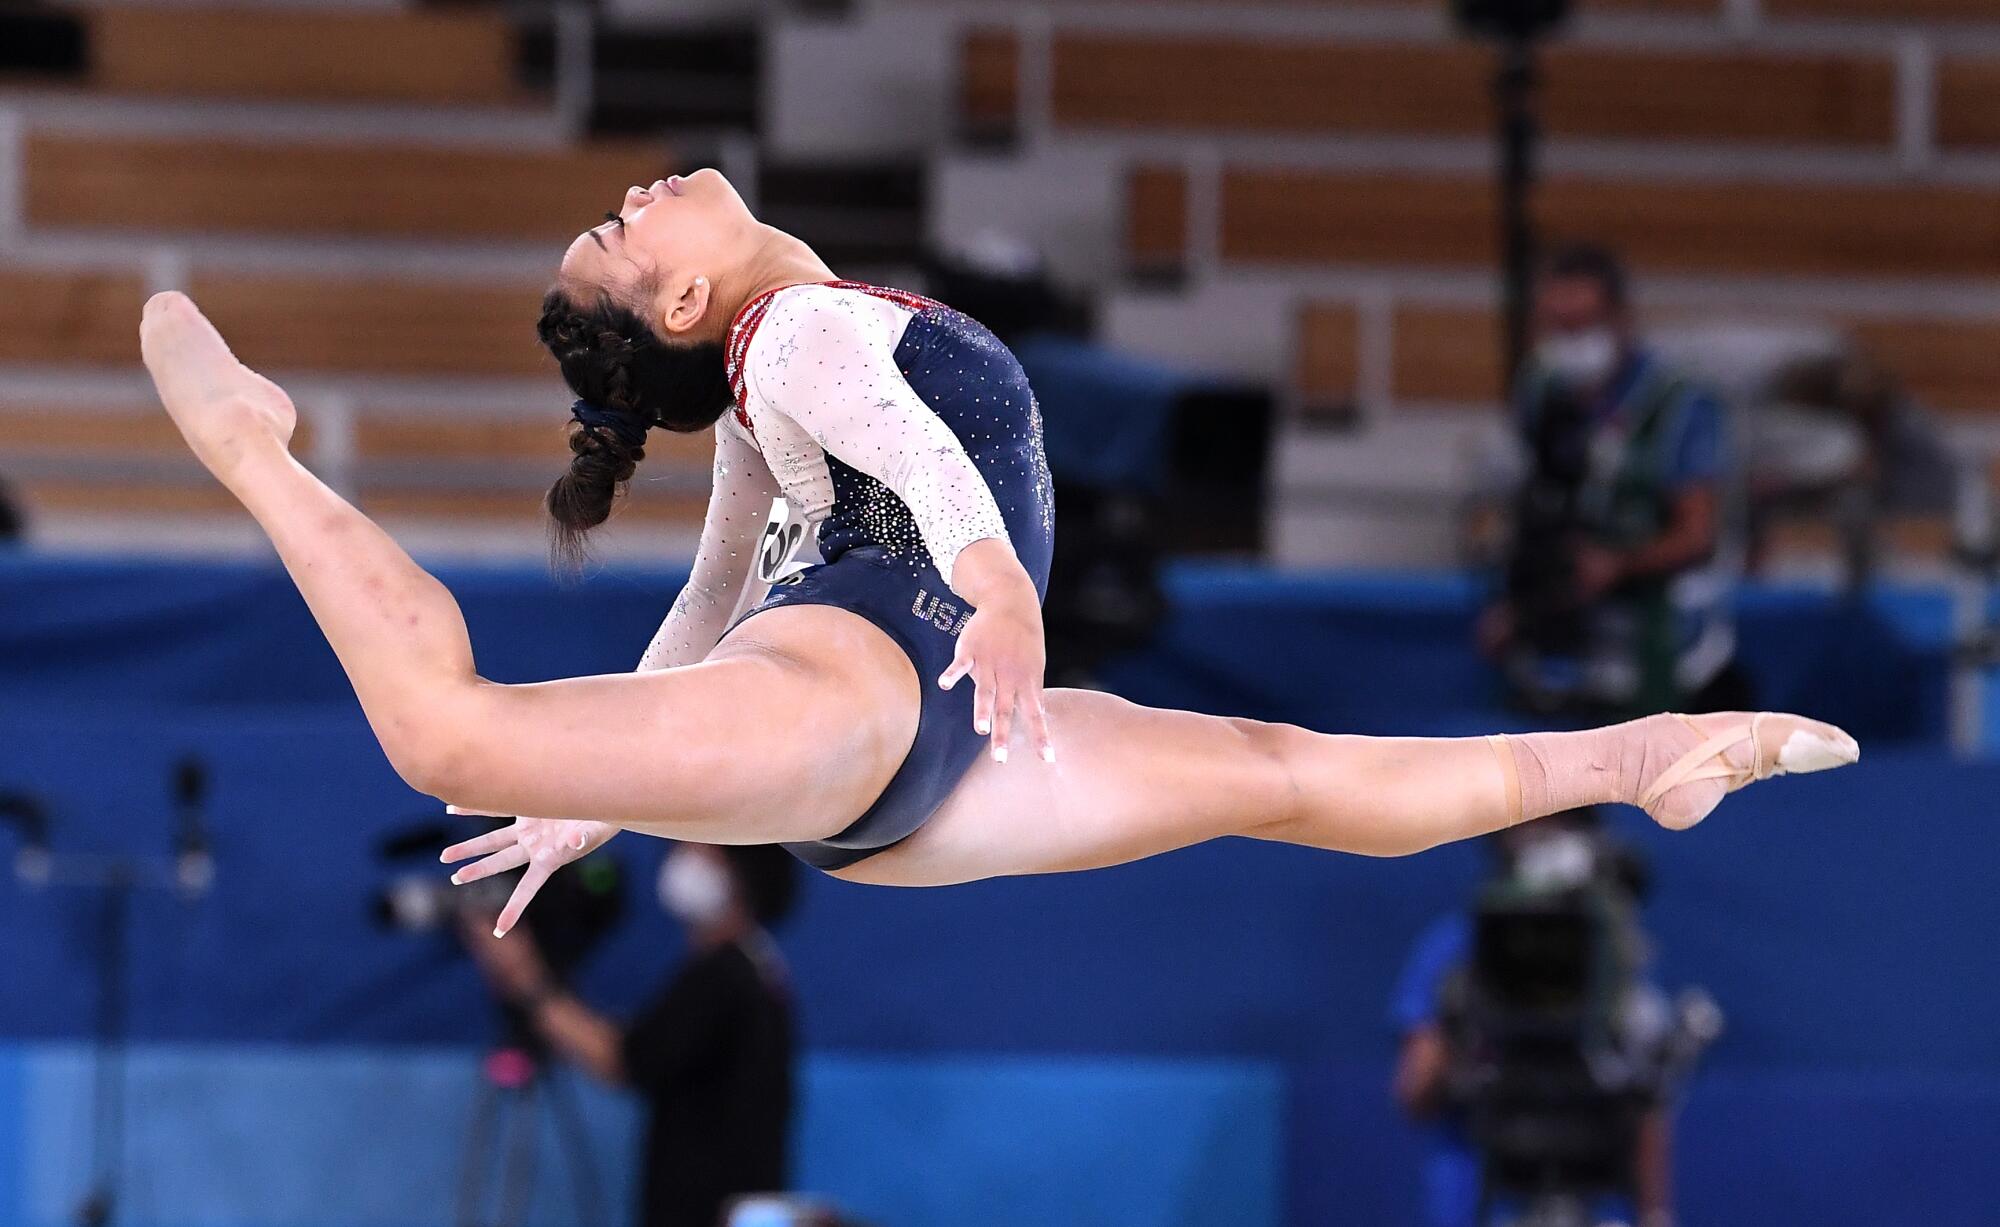 Suni Lee of the U.S. competes in the floor exercise.